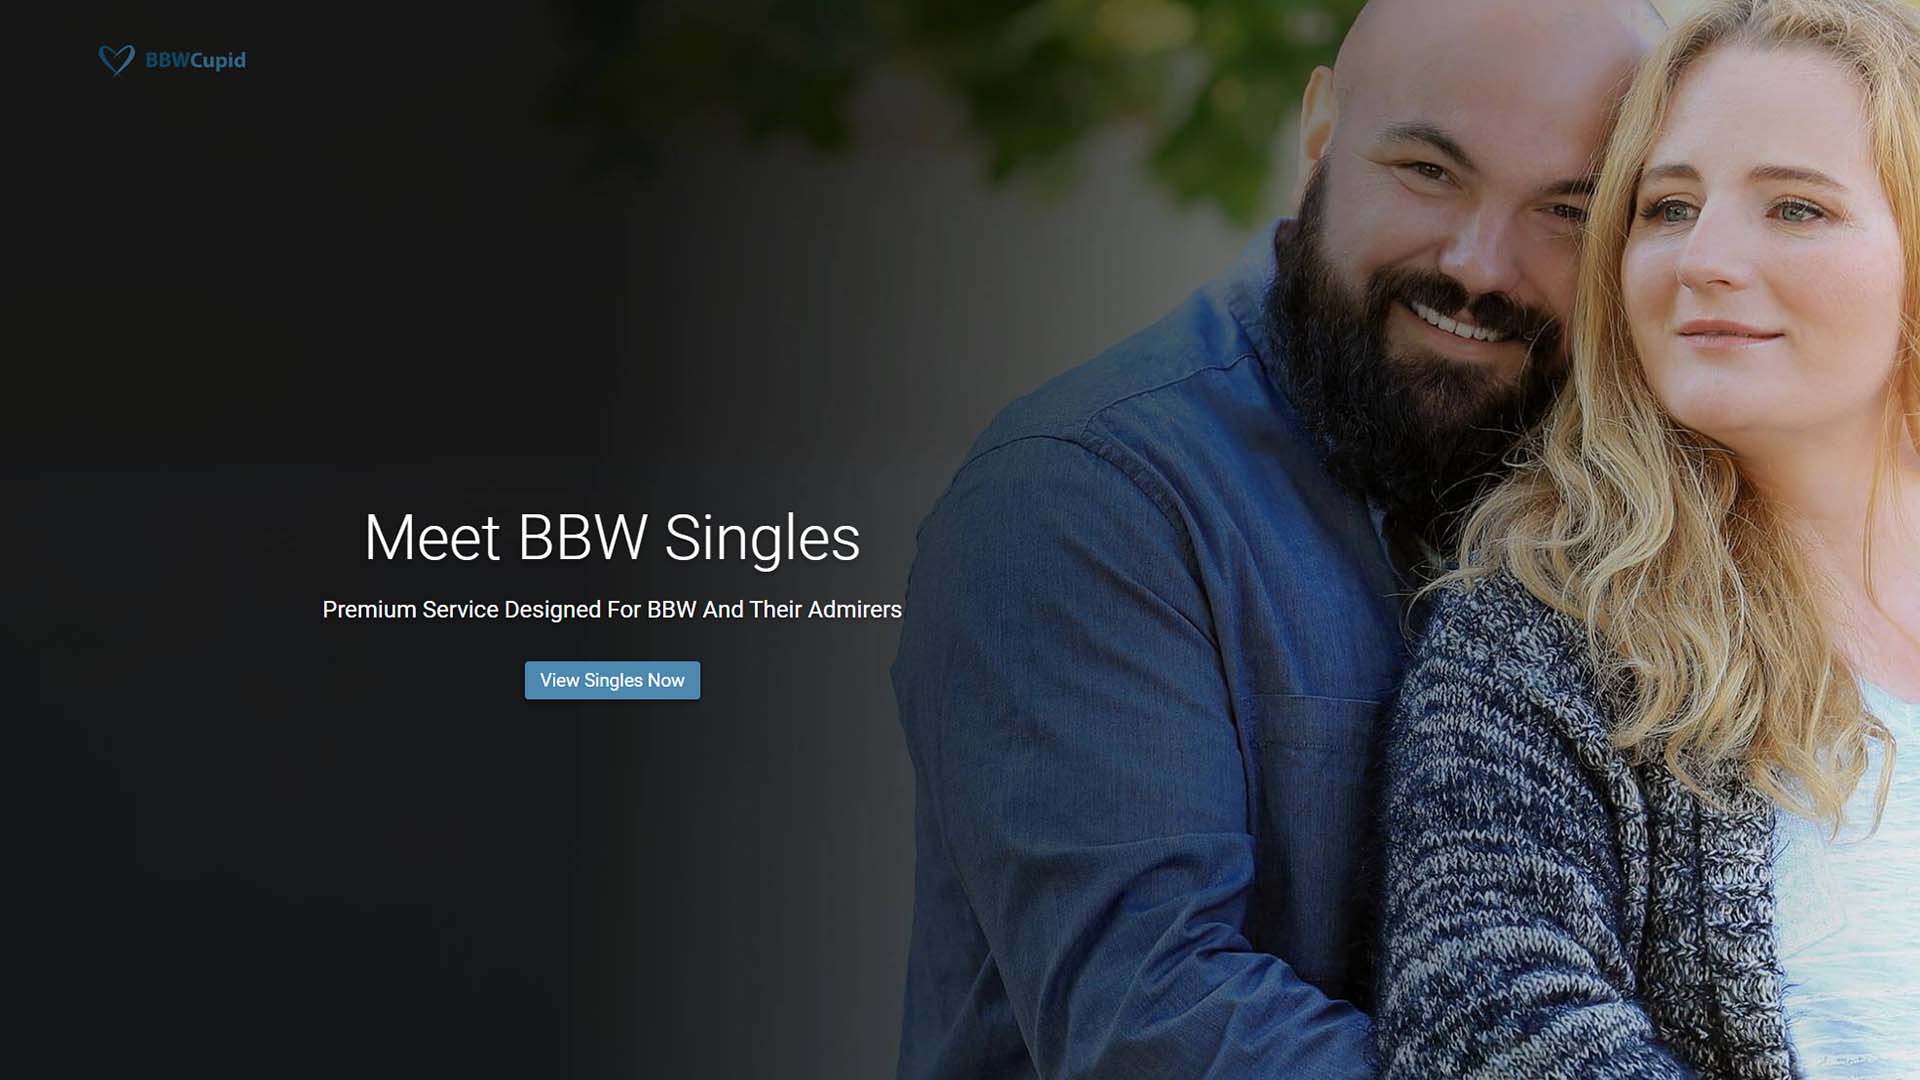 BBWCupid dating site homepage showing two plus-size people hugging and smiling.